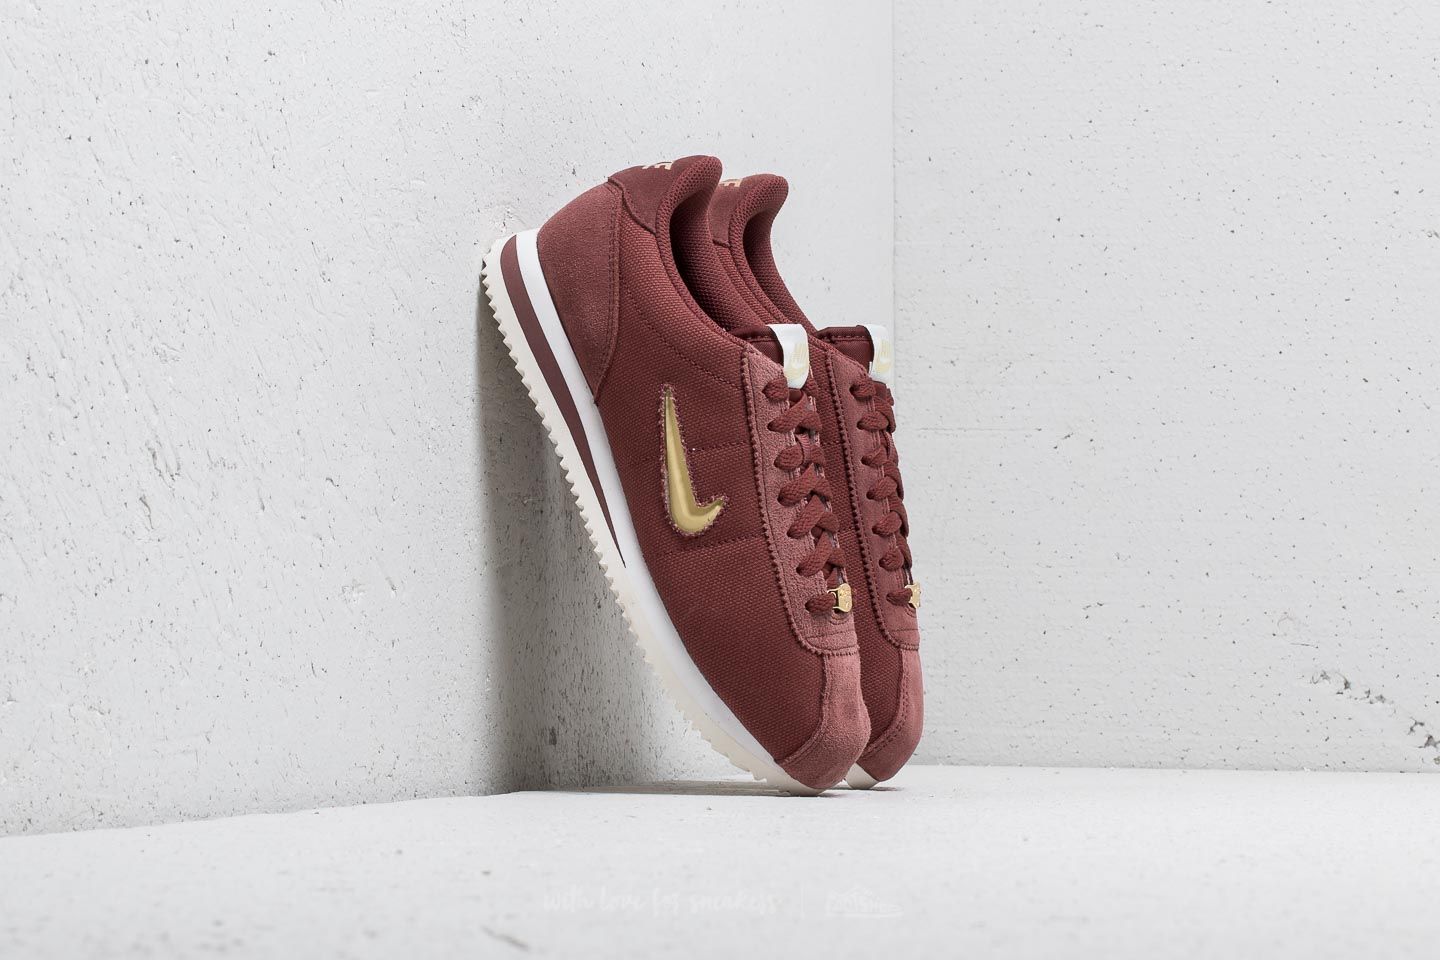 Chaussures et baskets femme Nike Cortez Basic Jewel ´18 WMNS Red Sepia/ Metalic Gold Star